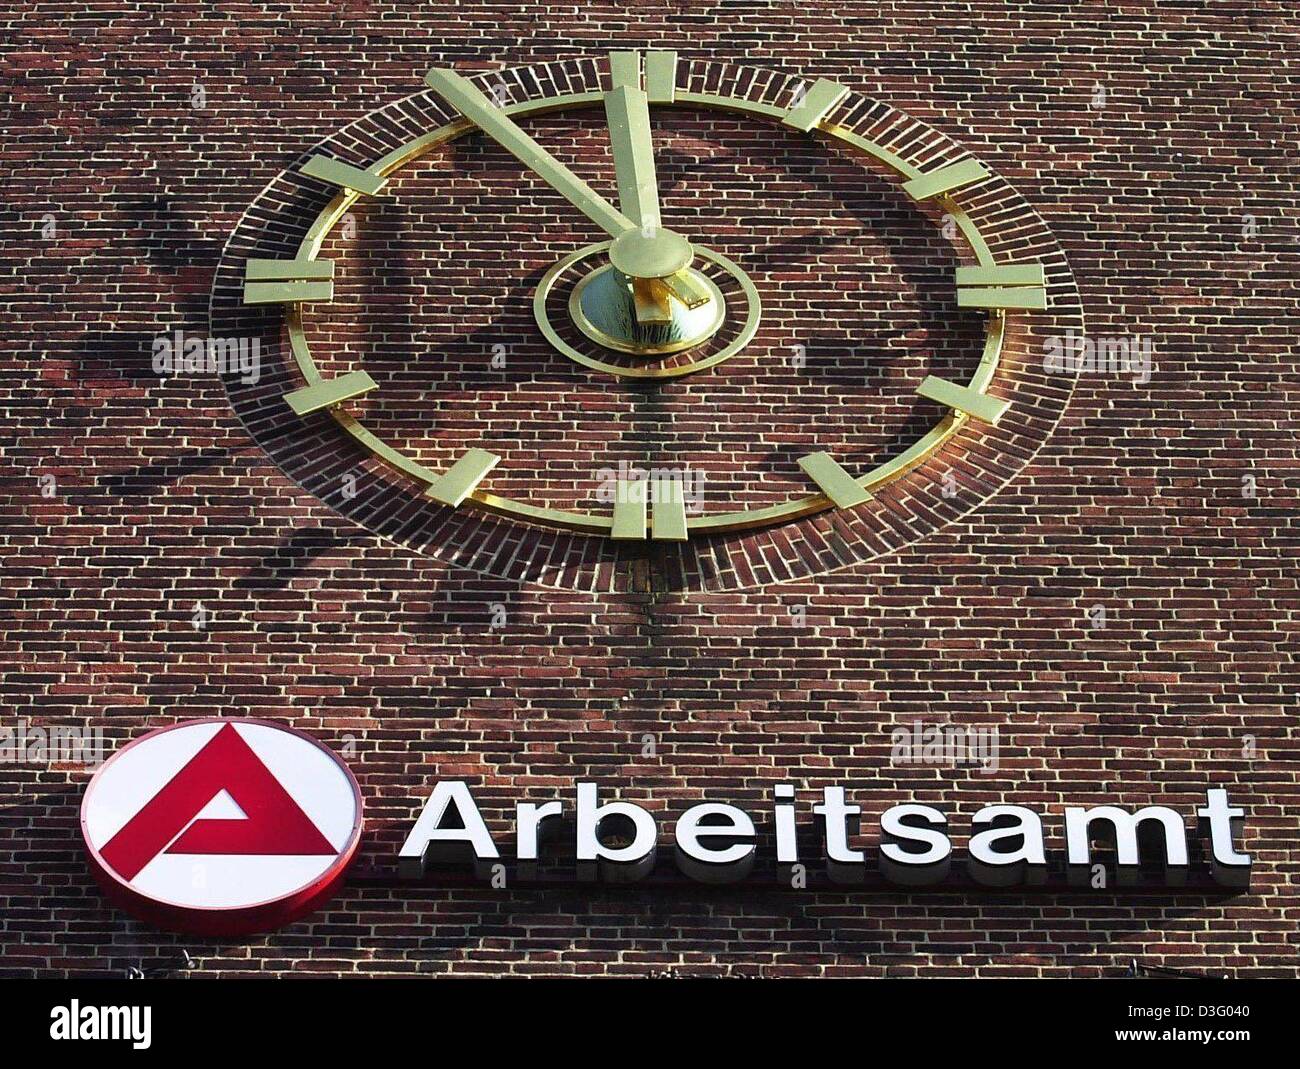 (dpa) - Five to twelve: The huge clock at the 'Arbeitsamt' (job centre) symbolically shows that it is high time, Hamburg, 24 February 2003. Stock Photo